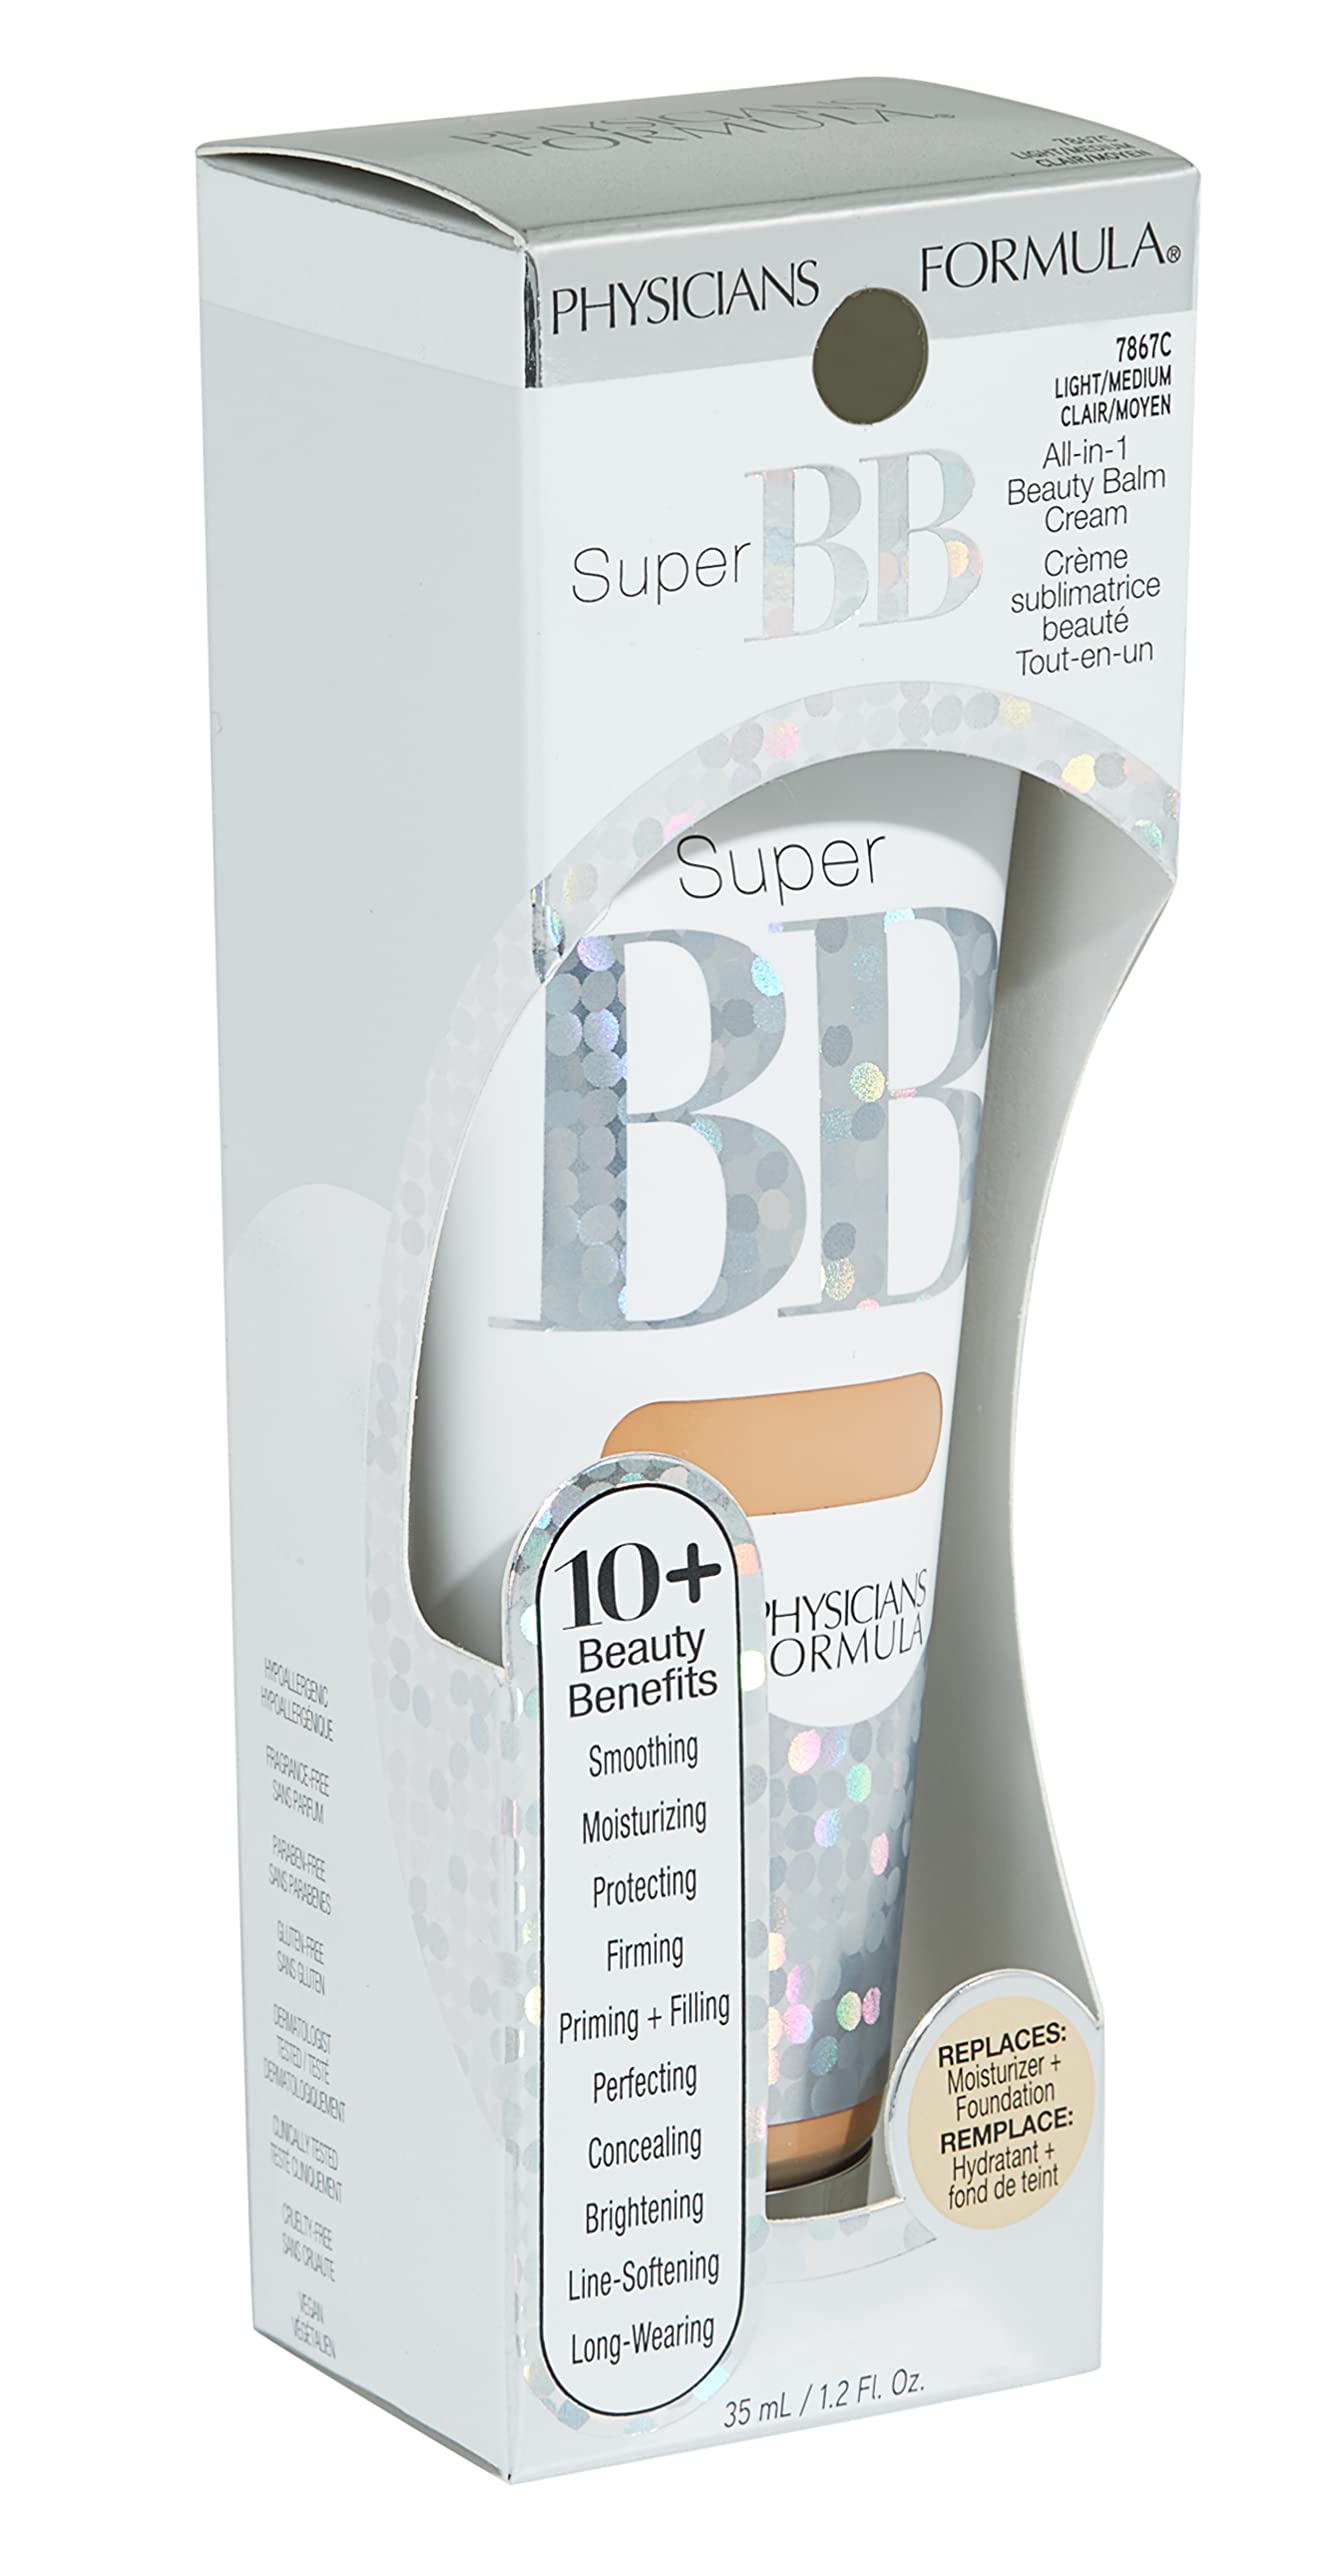 Physicians Formula Super BB All-in-1 Beauty Balm Cream Light/Medium | Dermatologist Tested, Clinicially Tested